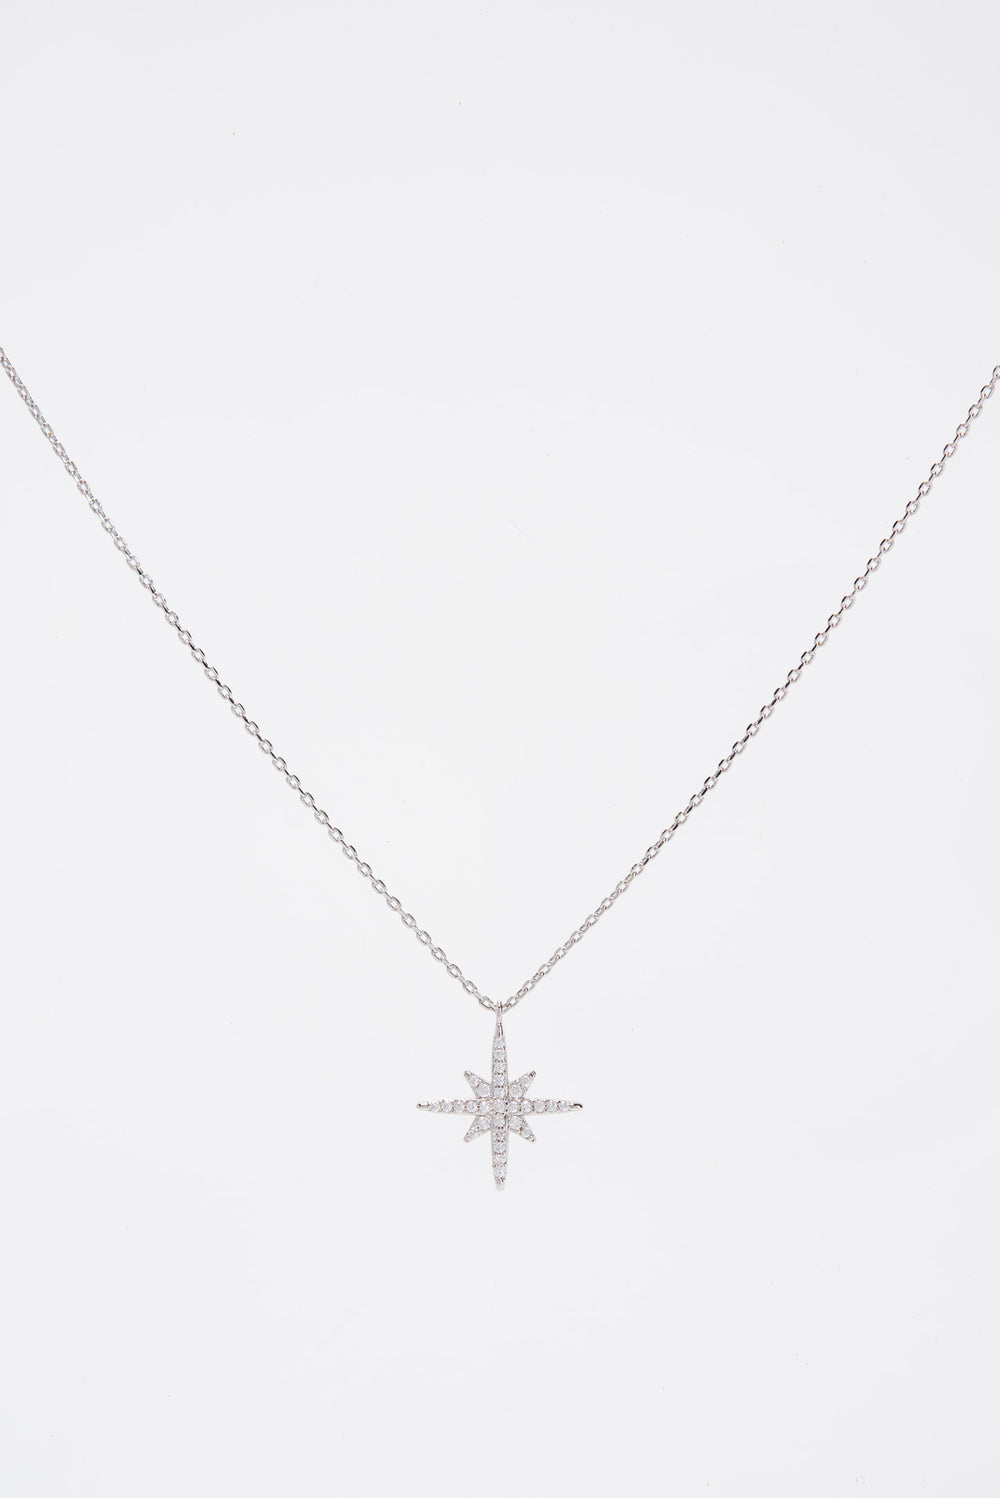 Isla 15 in Gold Plated CZ Star Pendant Necklace - Silver